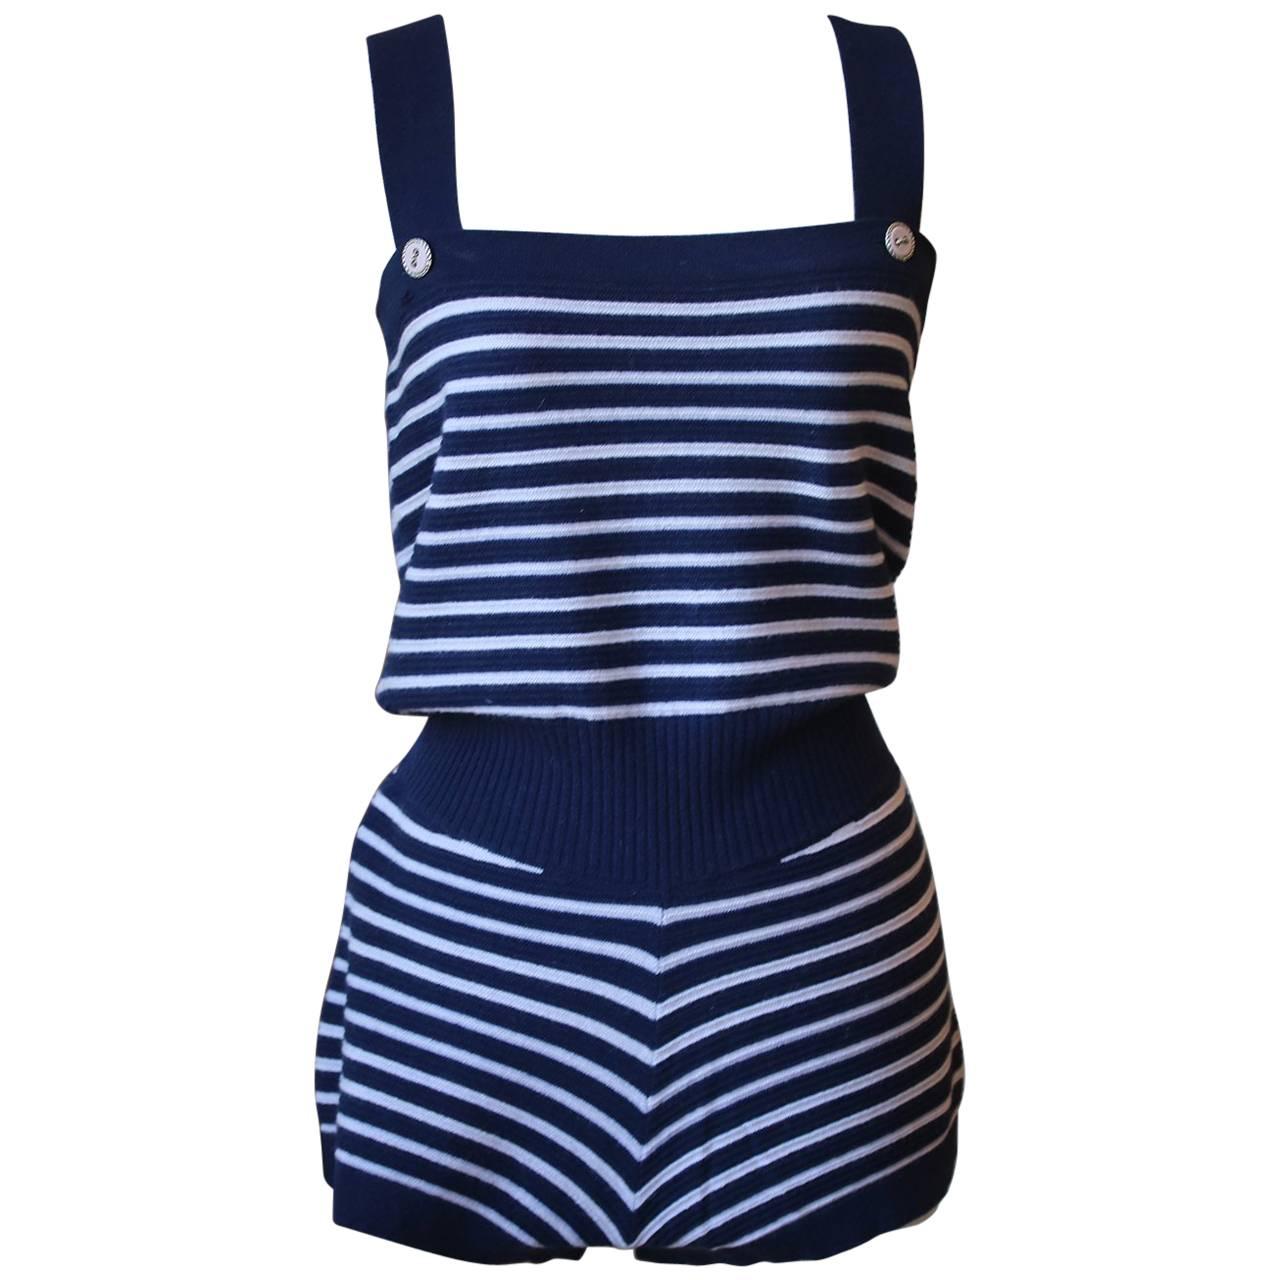 Chanel Stripe Cashmere Knitted Playsuit